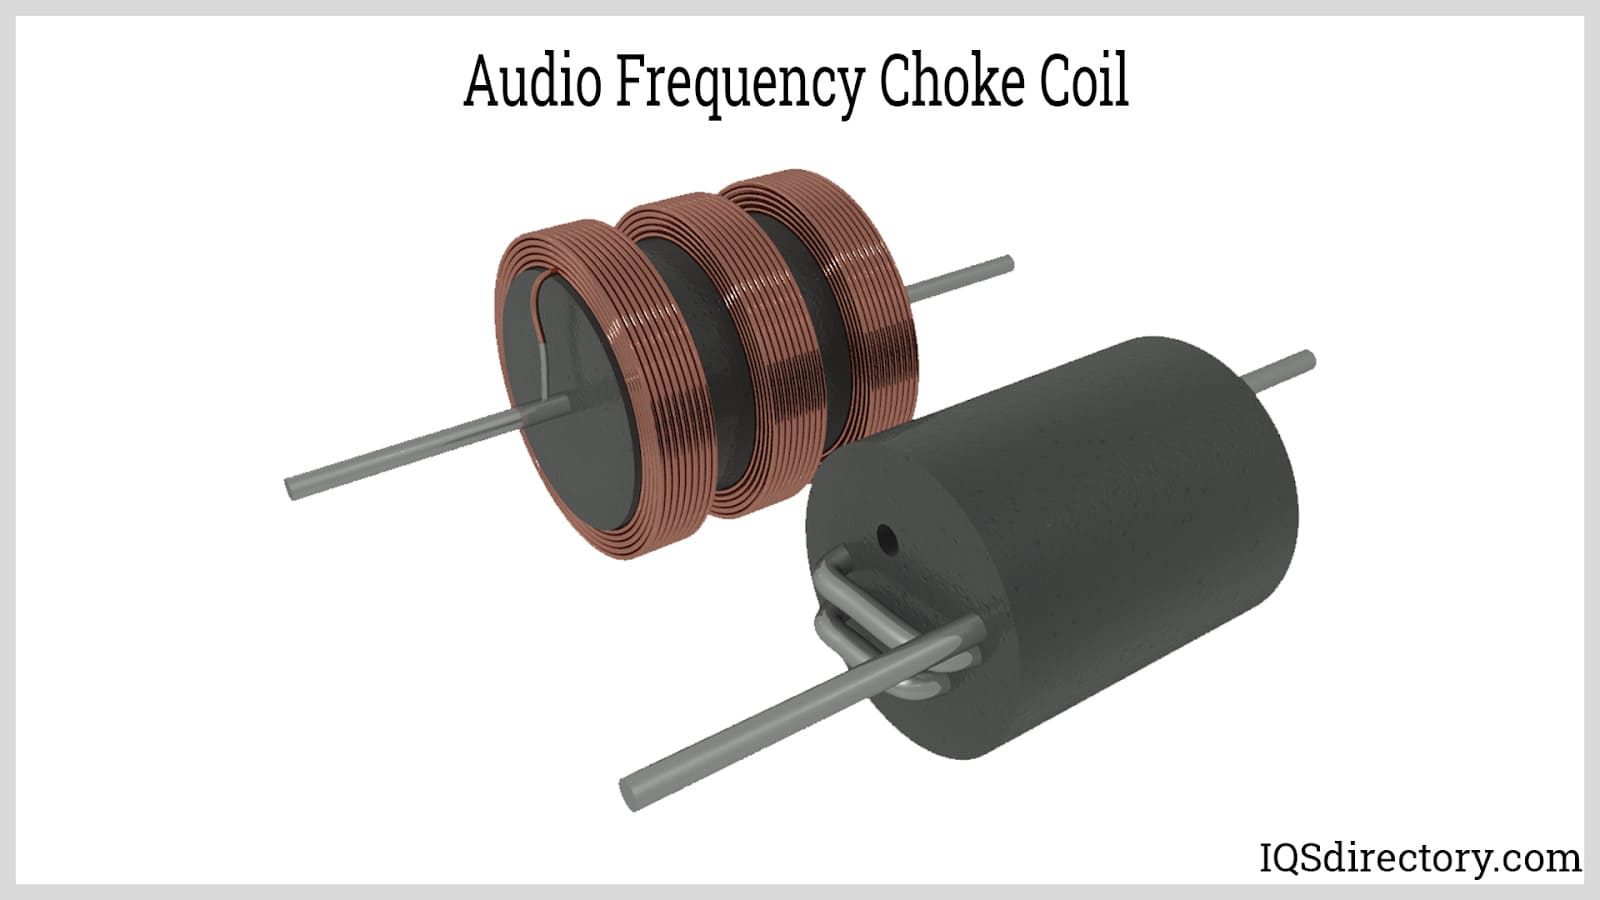 Audio Frequency Choke Coil